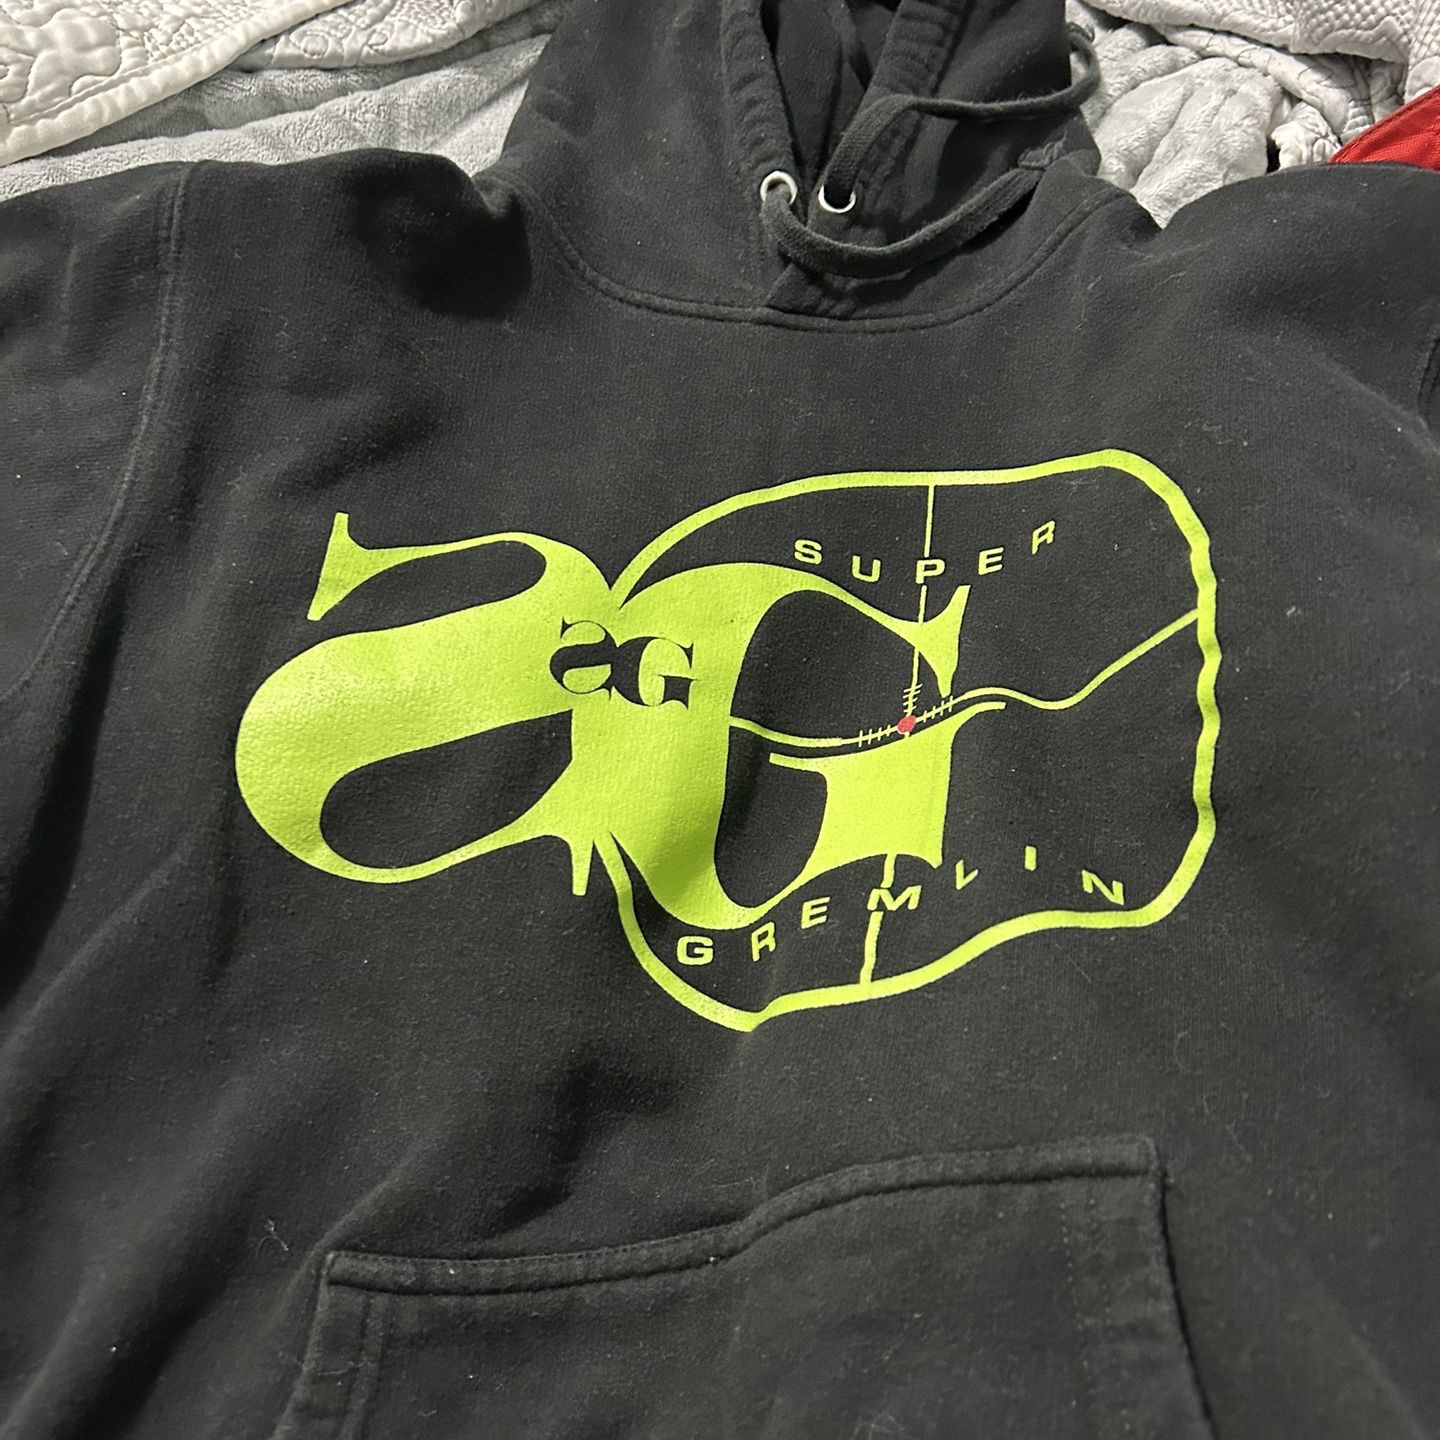 Singer Gang Hoodie Limited Edition